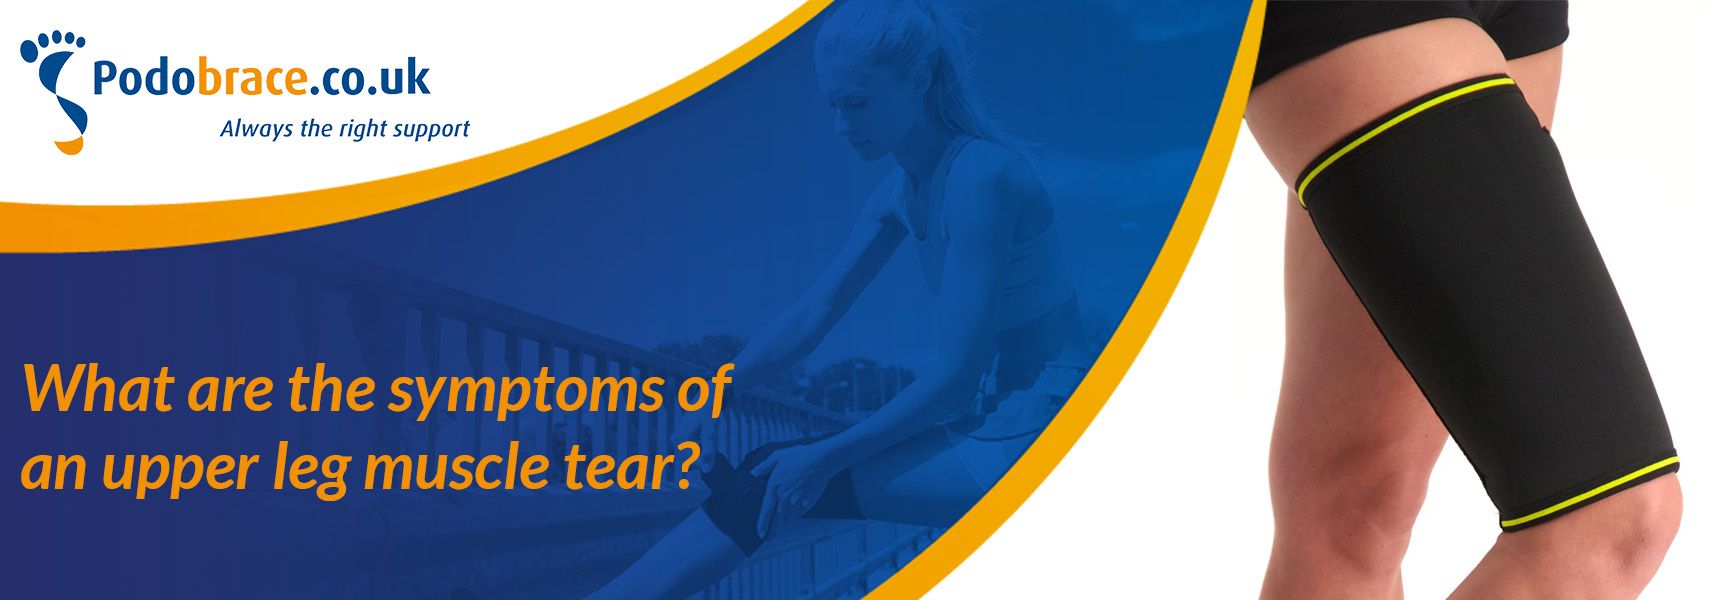 what are the symptoms of an upper leg muscle tear